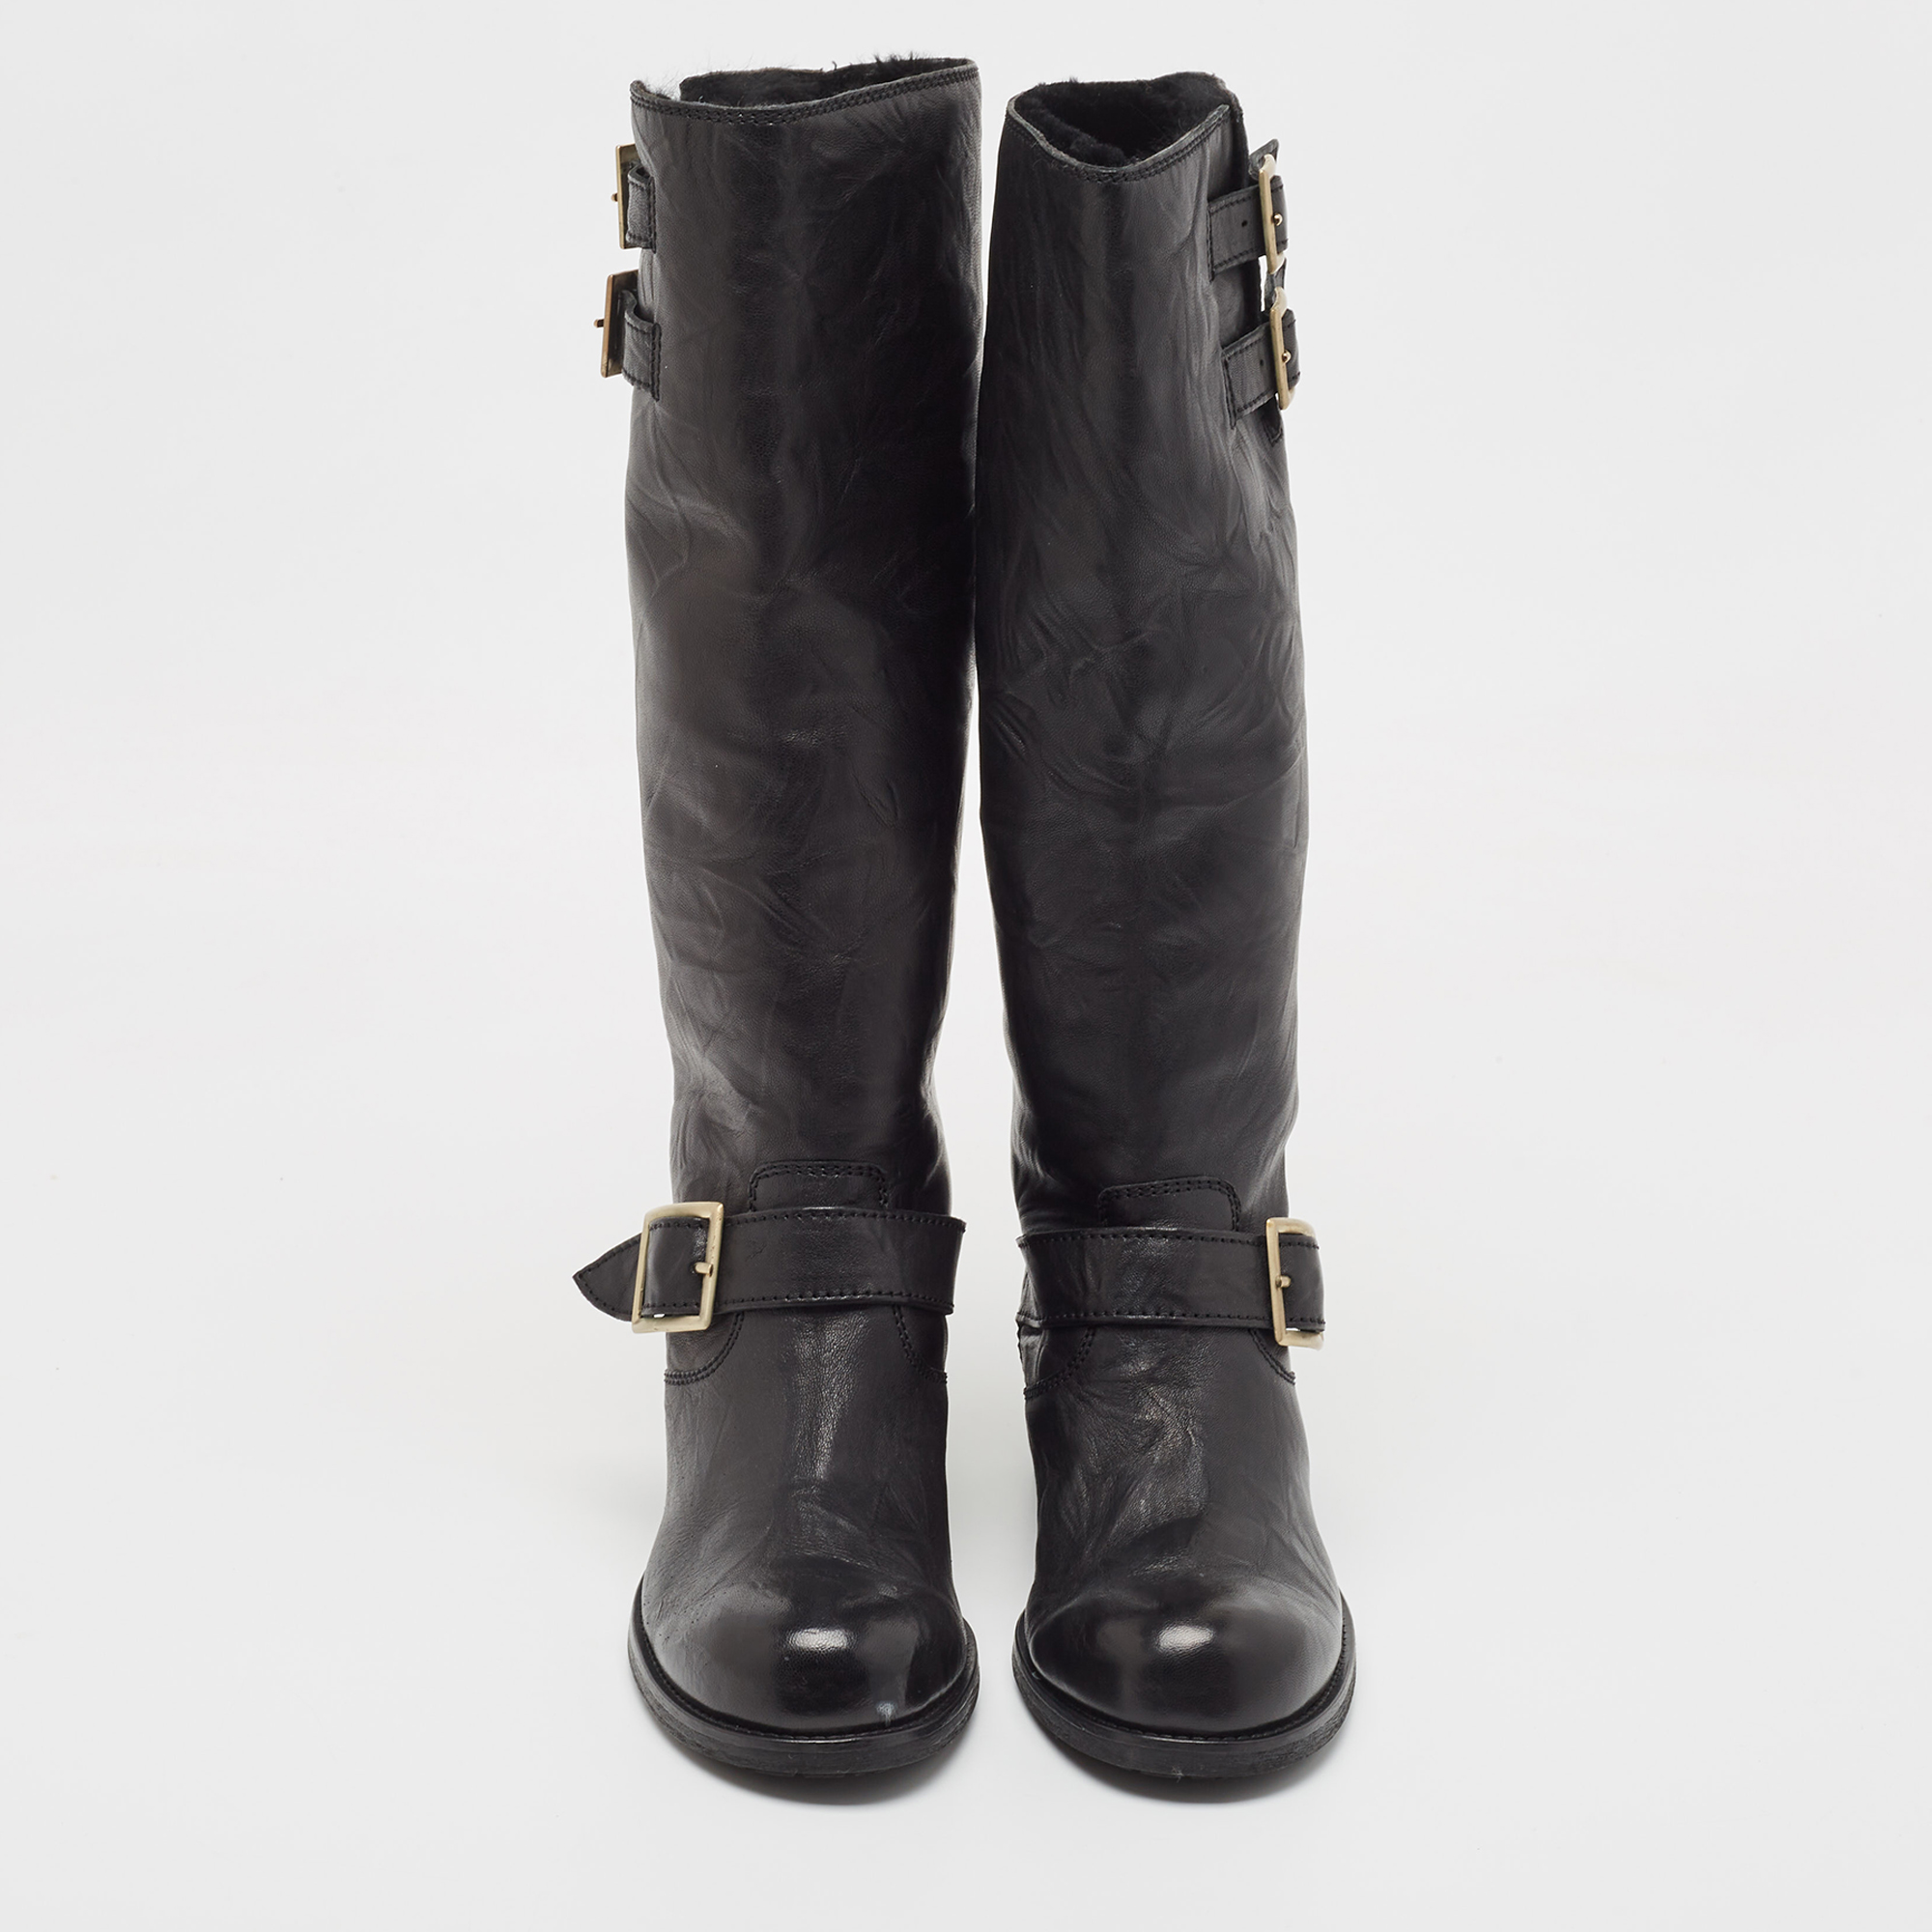 Jimmy Choo Black Leather Knee Length Boots Size 35.5